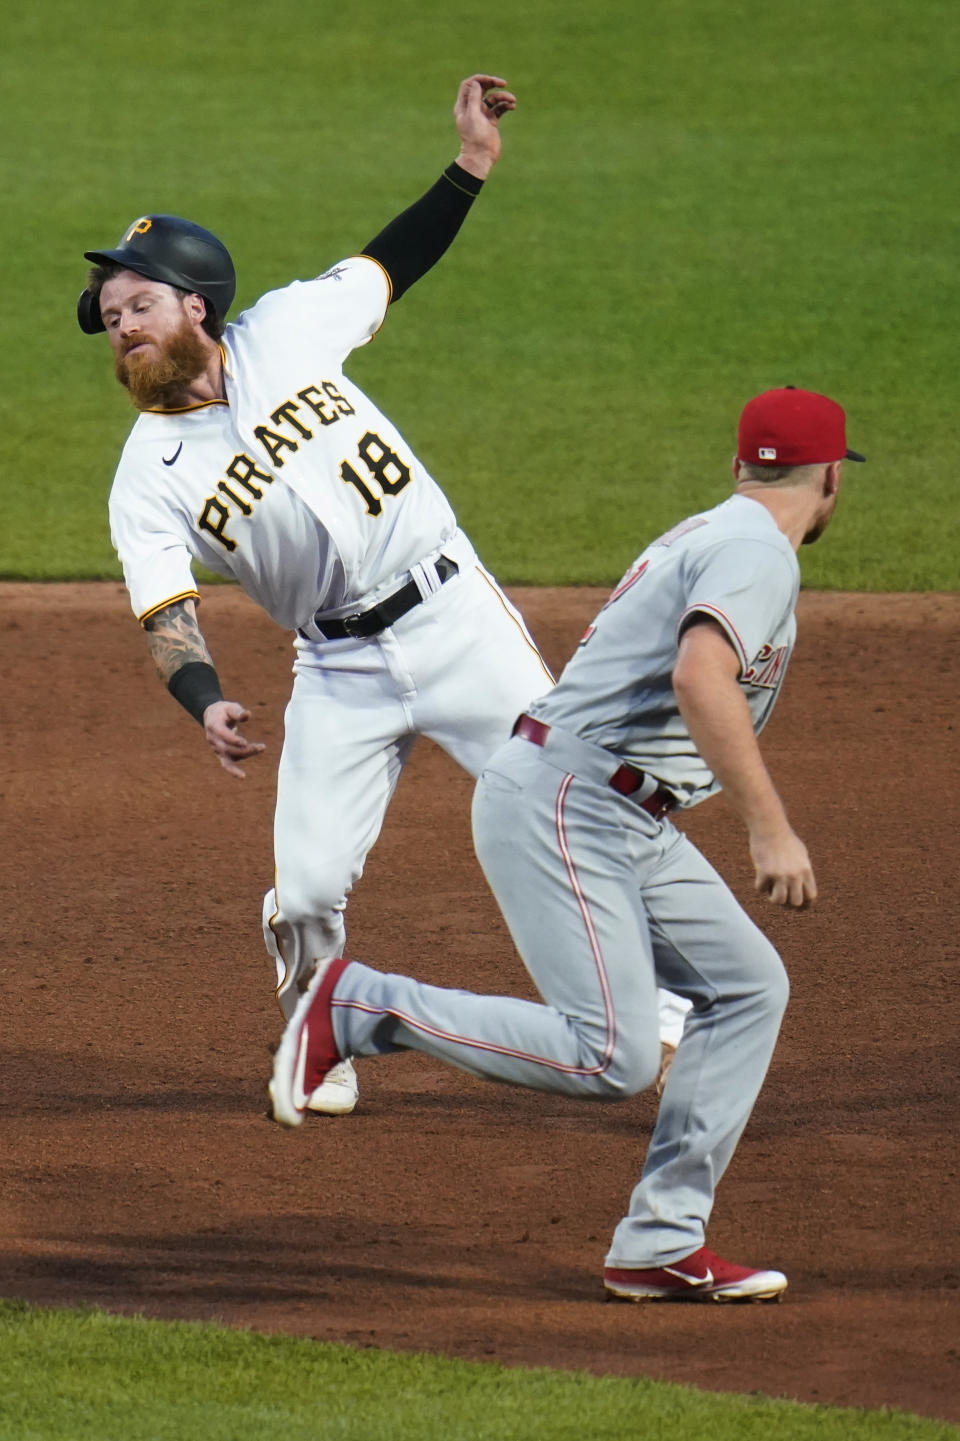 Pittsburgh Pirates' Ben Gamel (18) twists away as he tries to evade the tag from Cincinnati Reds third baseman Brandon Drury after he was caught off first and then in in a rundown between first and second during the sixth inning of a baseball game Thursday, May 12, 2022, in Pittsburgh. (AP Photo/Keith Srakocic)